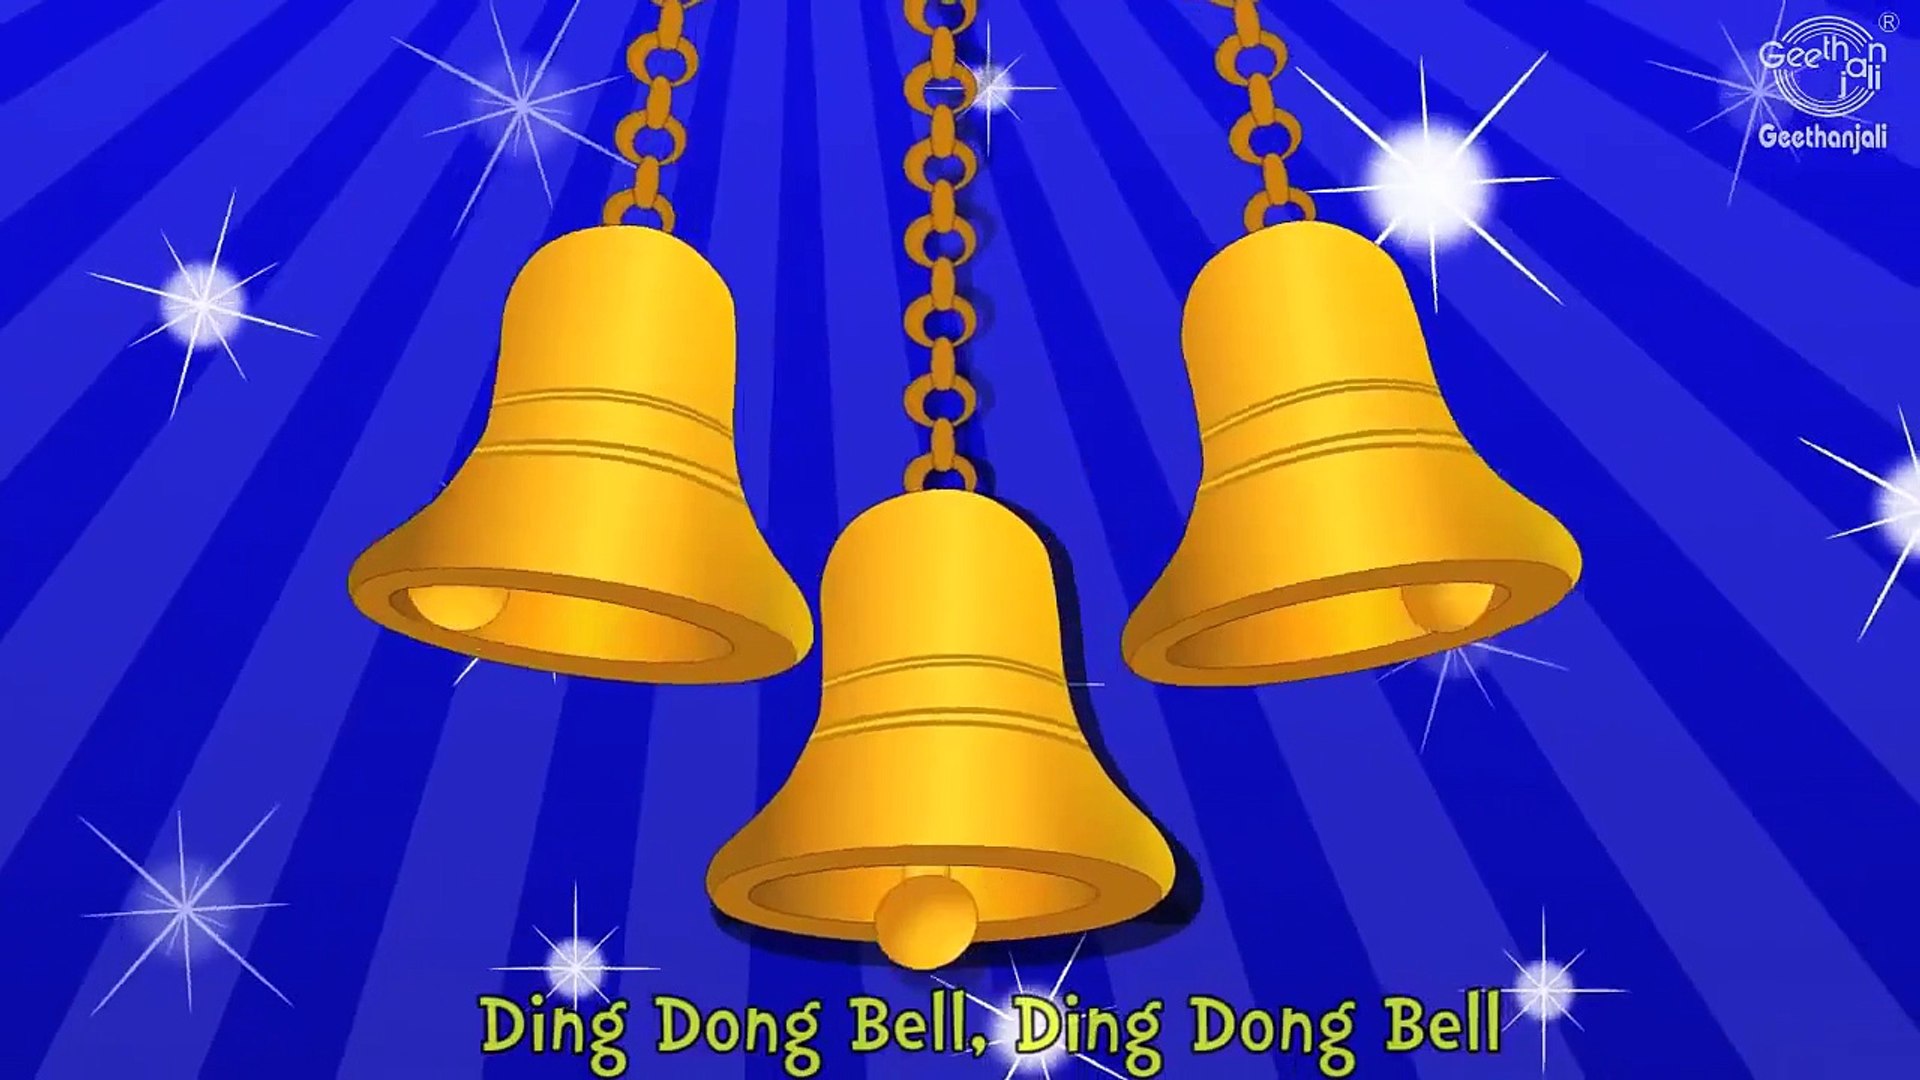 Ding Dong Bell! Pussy's In The Well! - Colombo Telegraph